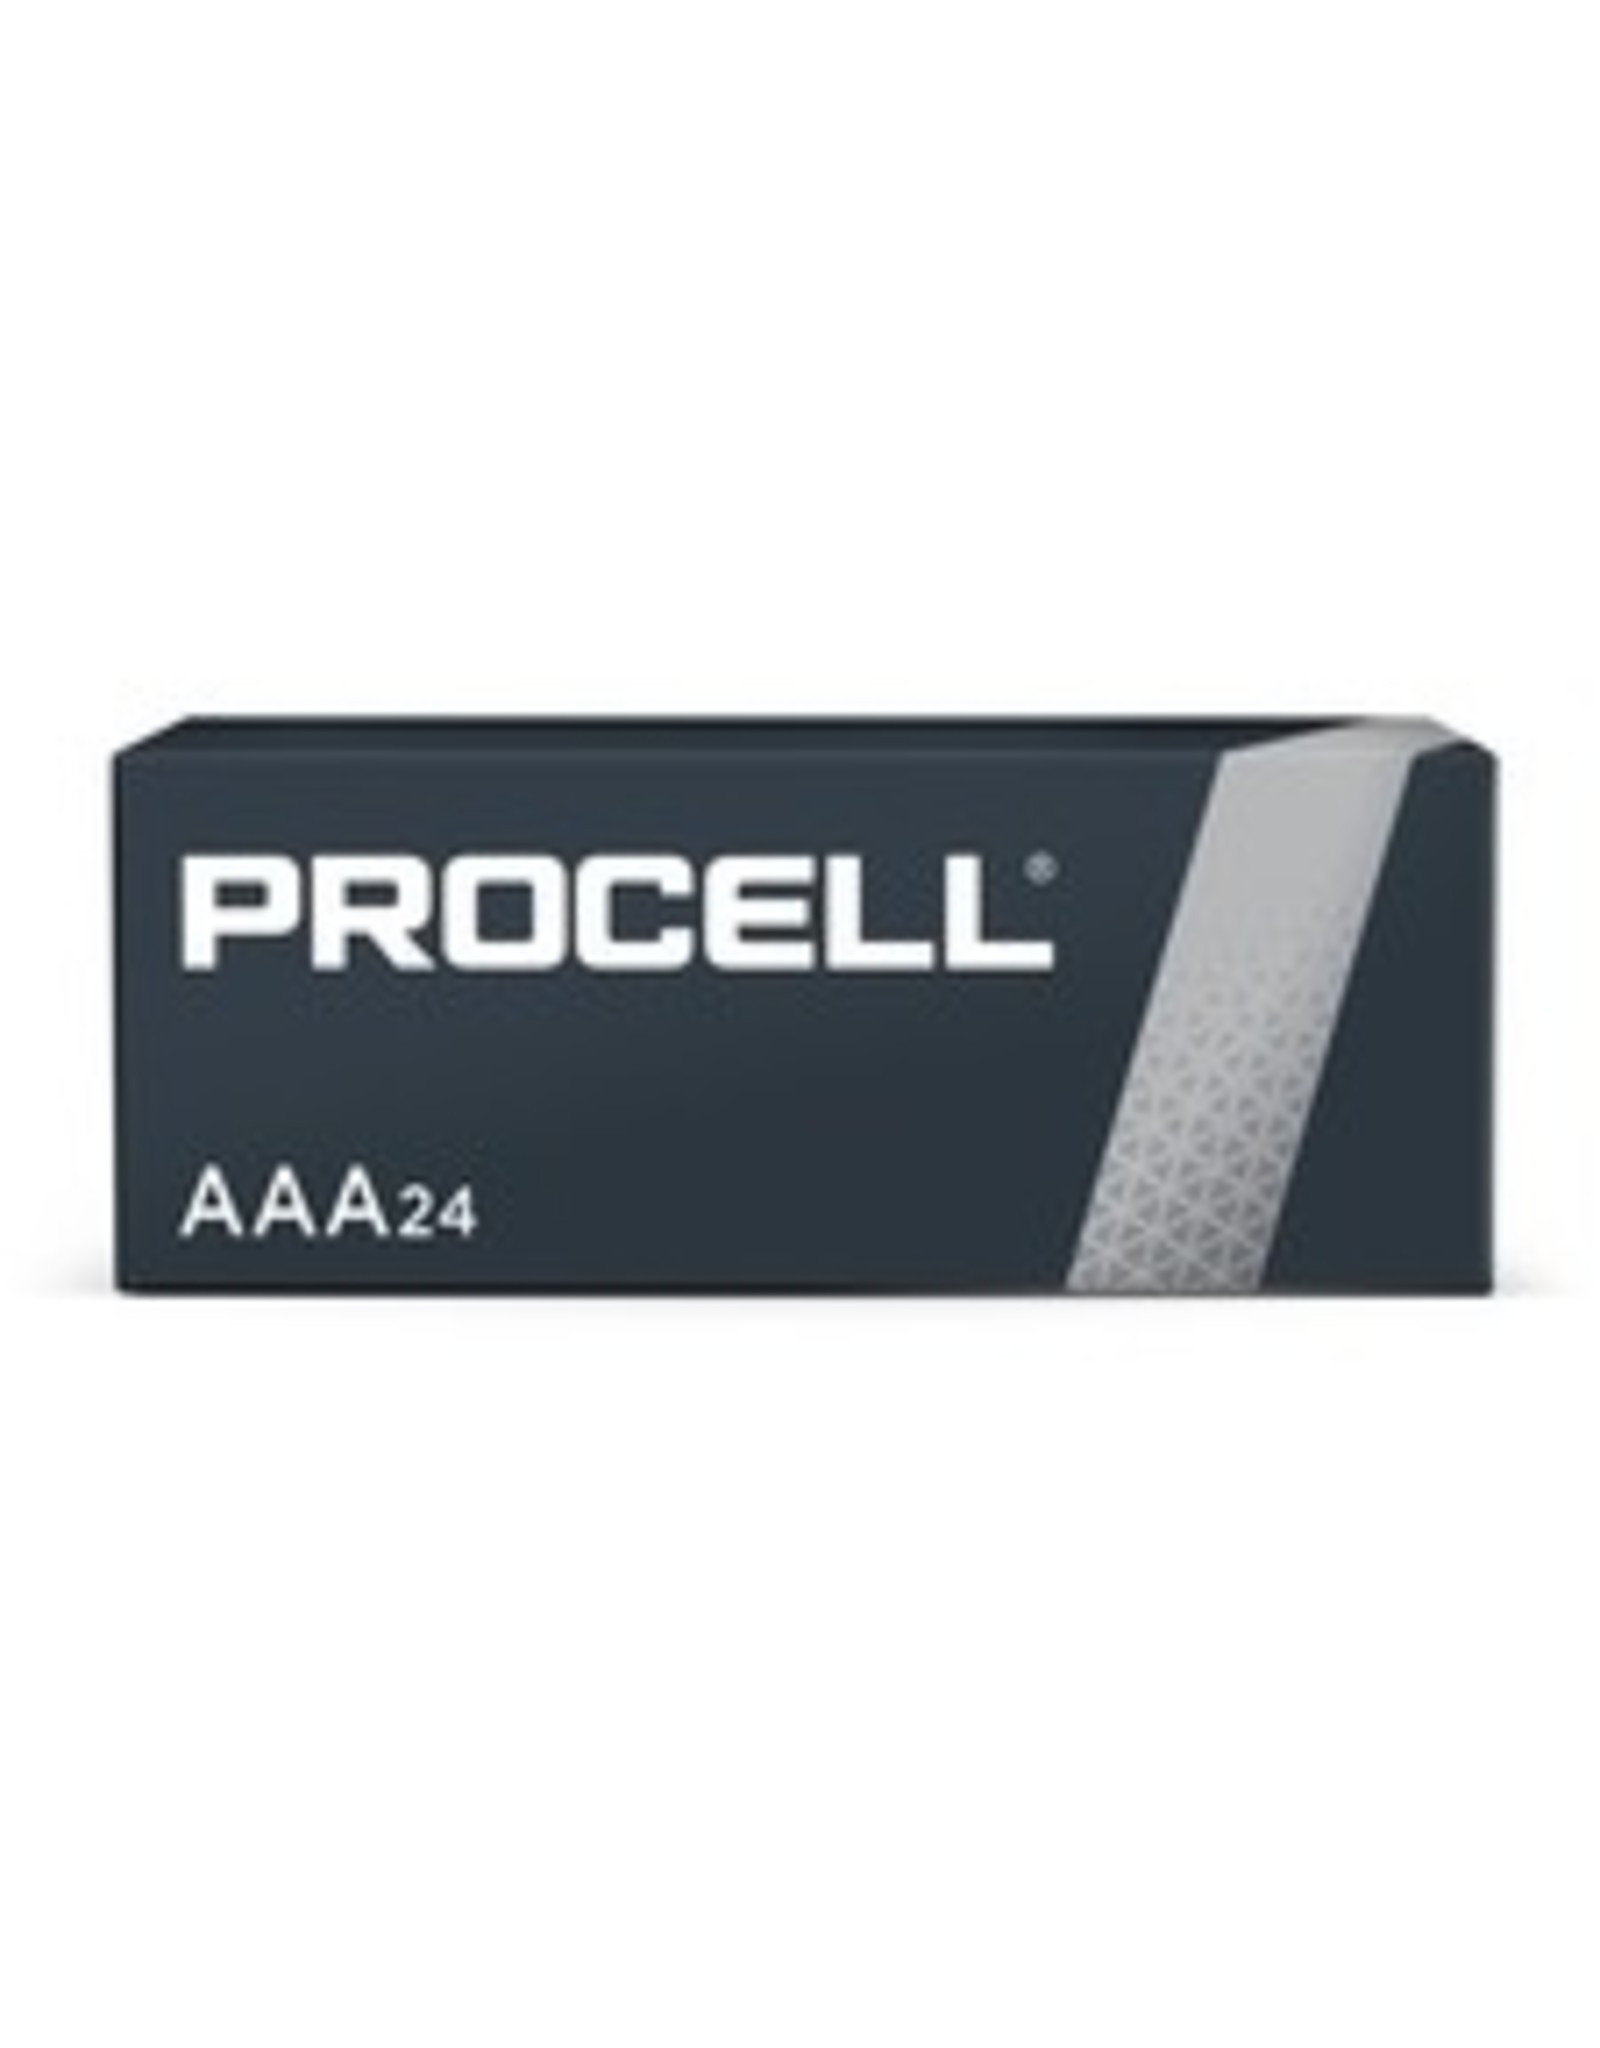 BATTERY, PROCELL 'AAA' 1.5V*24